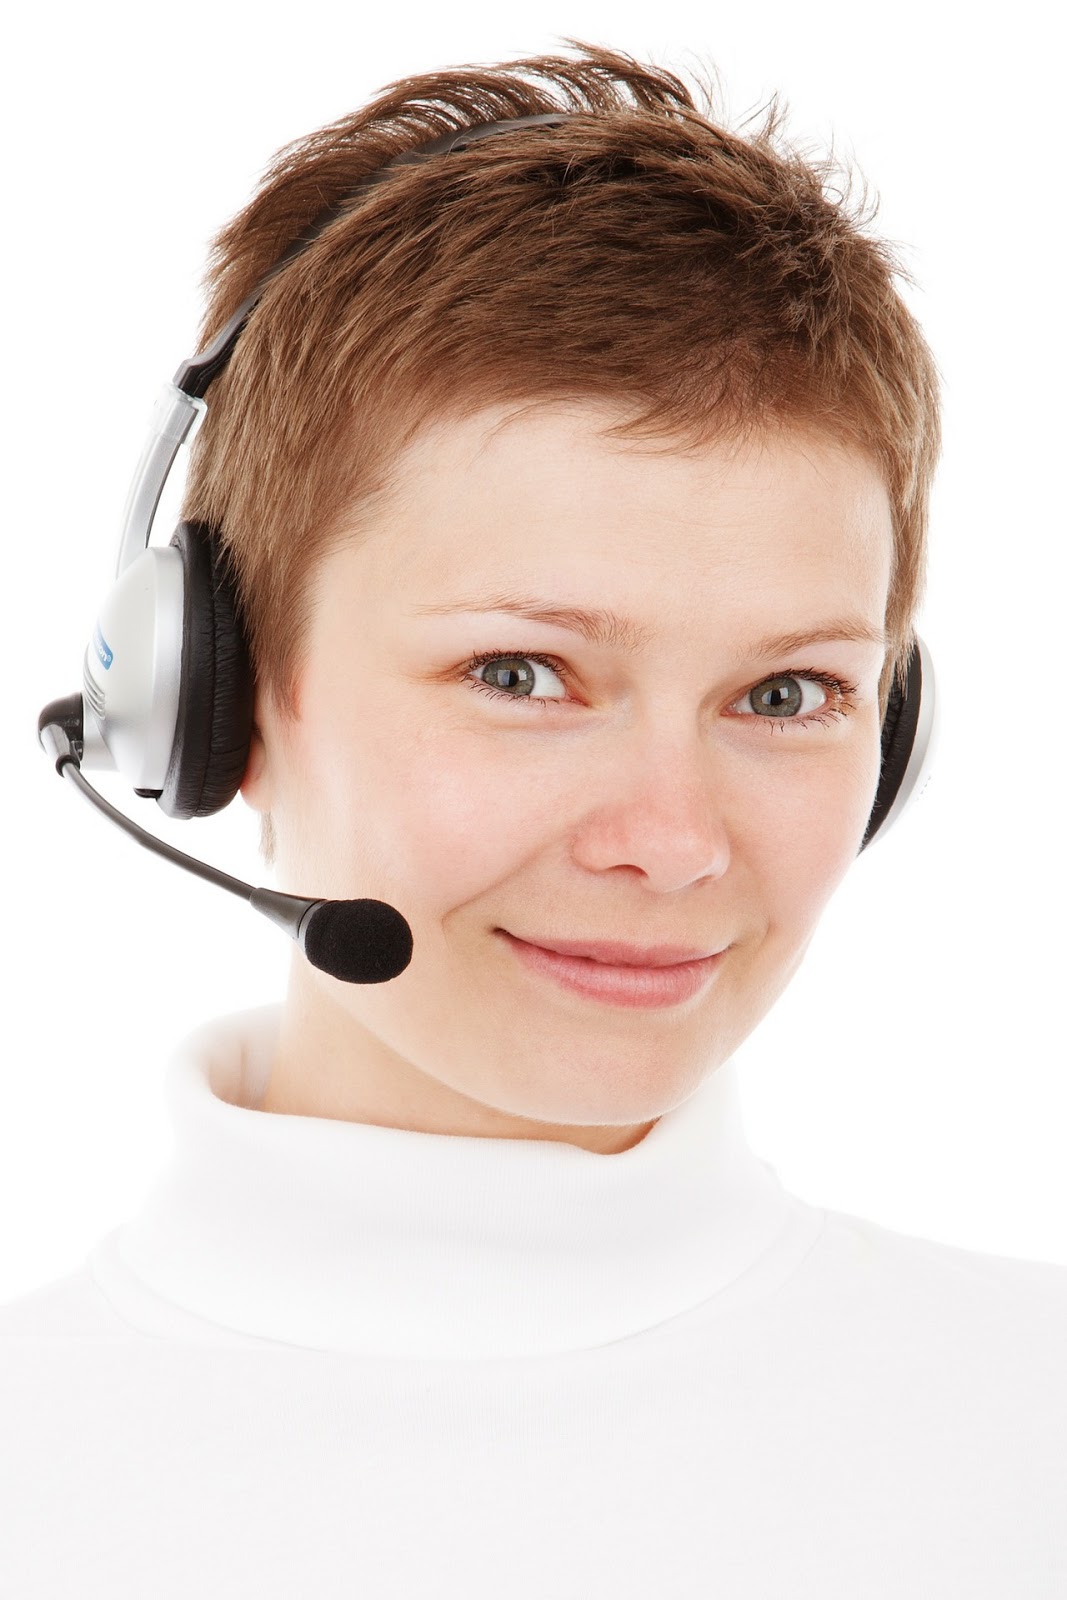 call-txu-energy-customer-support-immediately-if-you-had-trouble